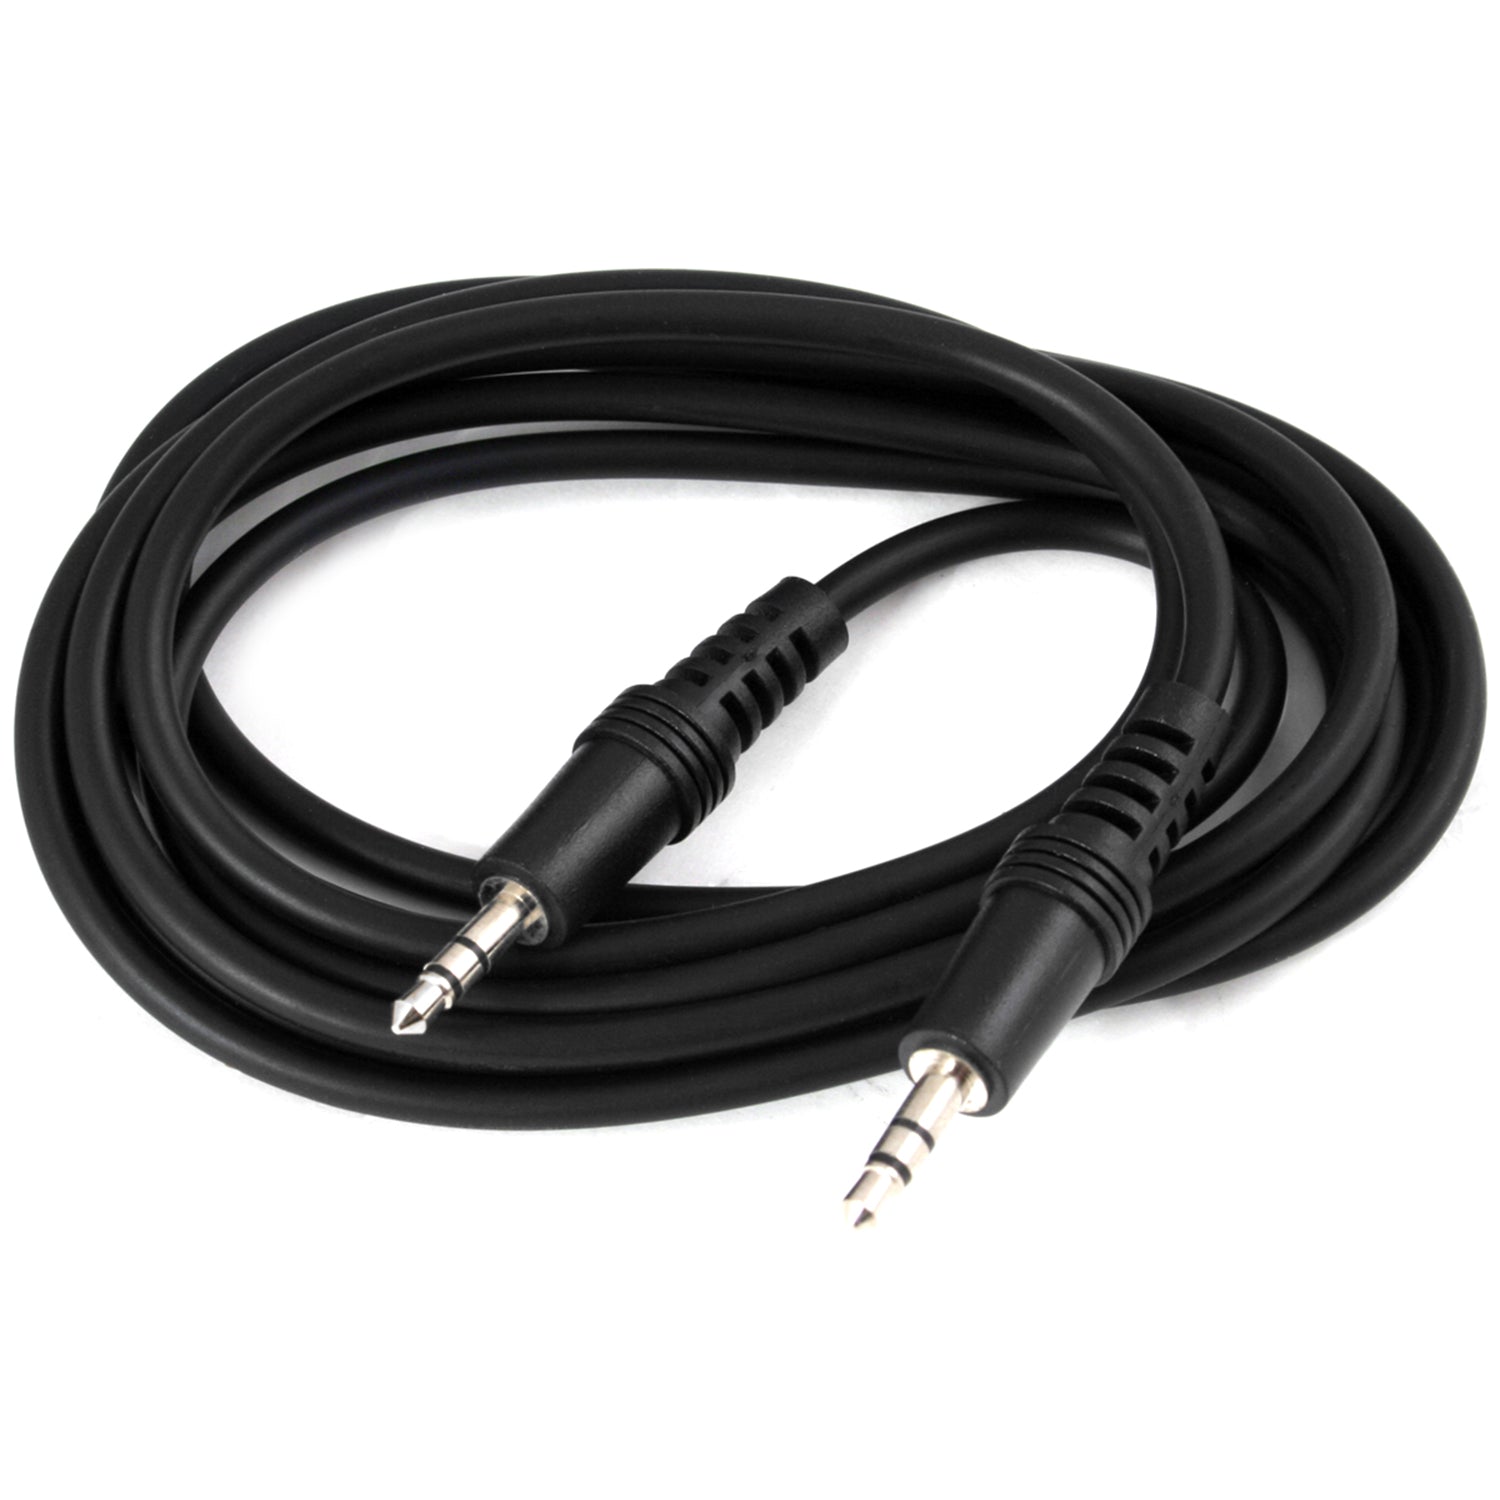 Mini to Mini AUX Cable for Portable Devices (6-ft)